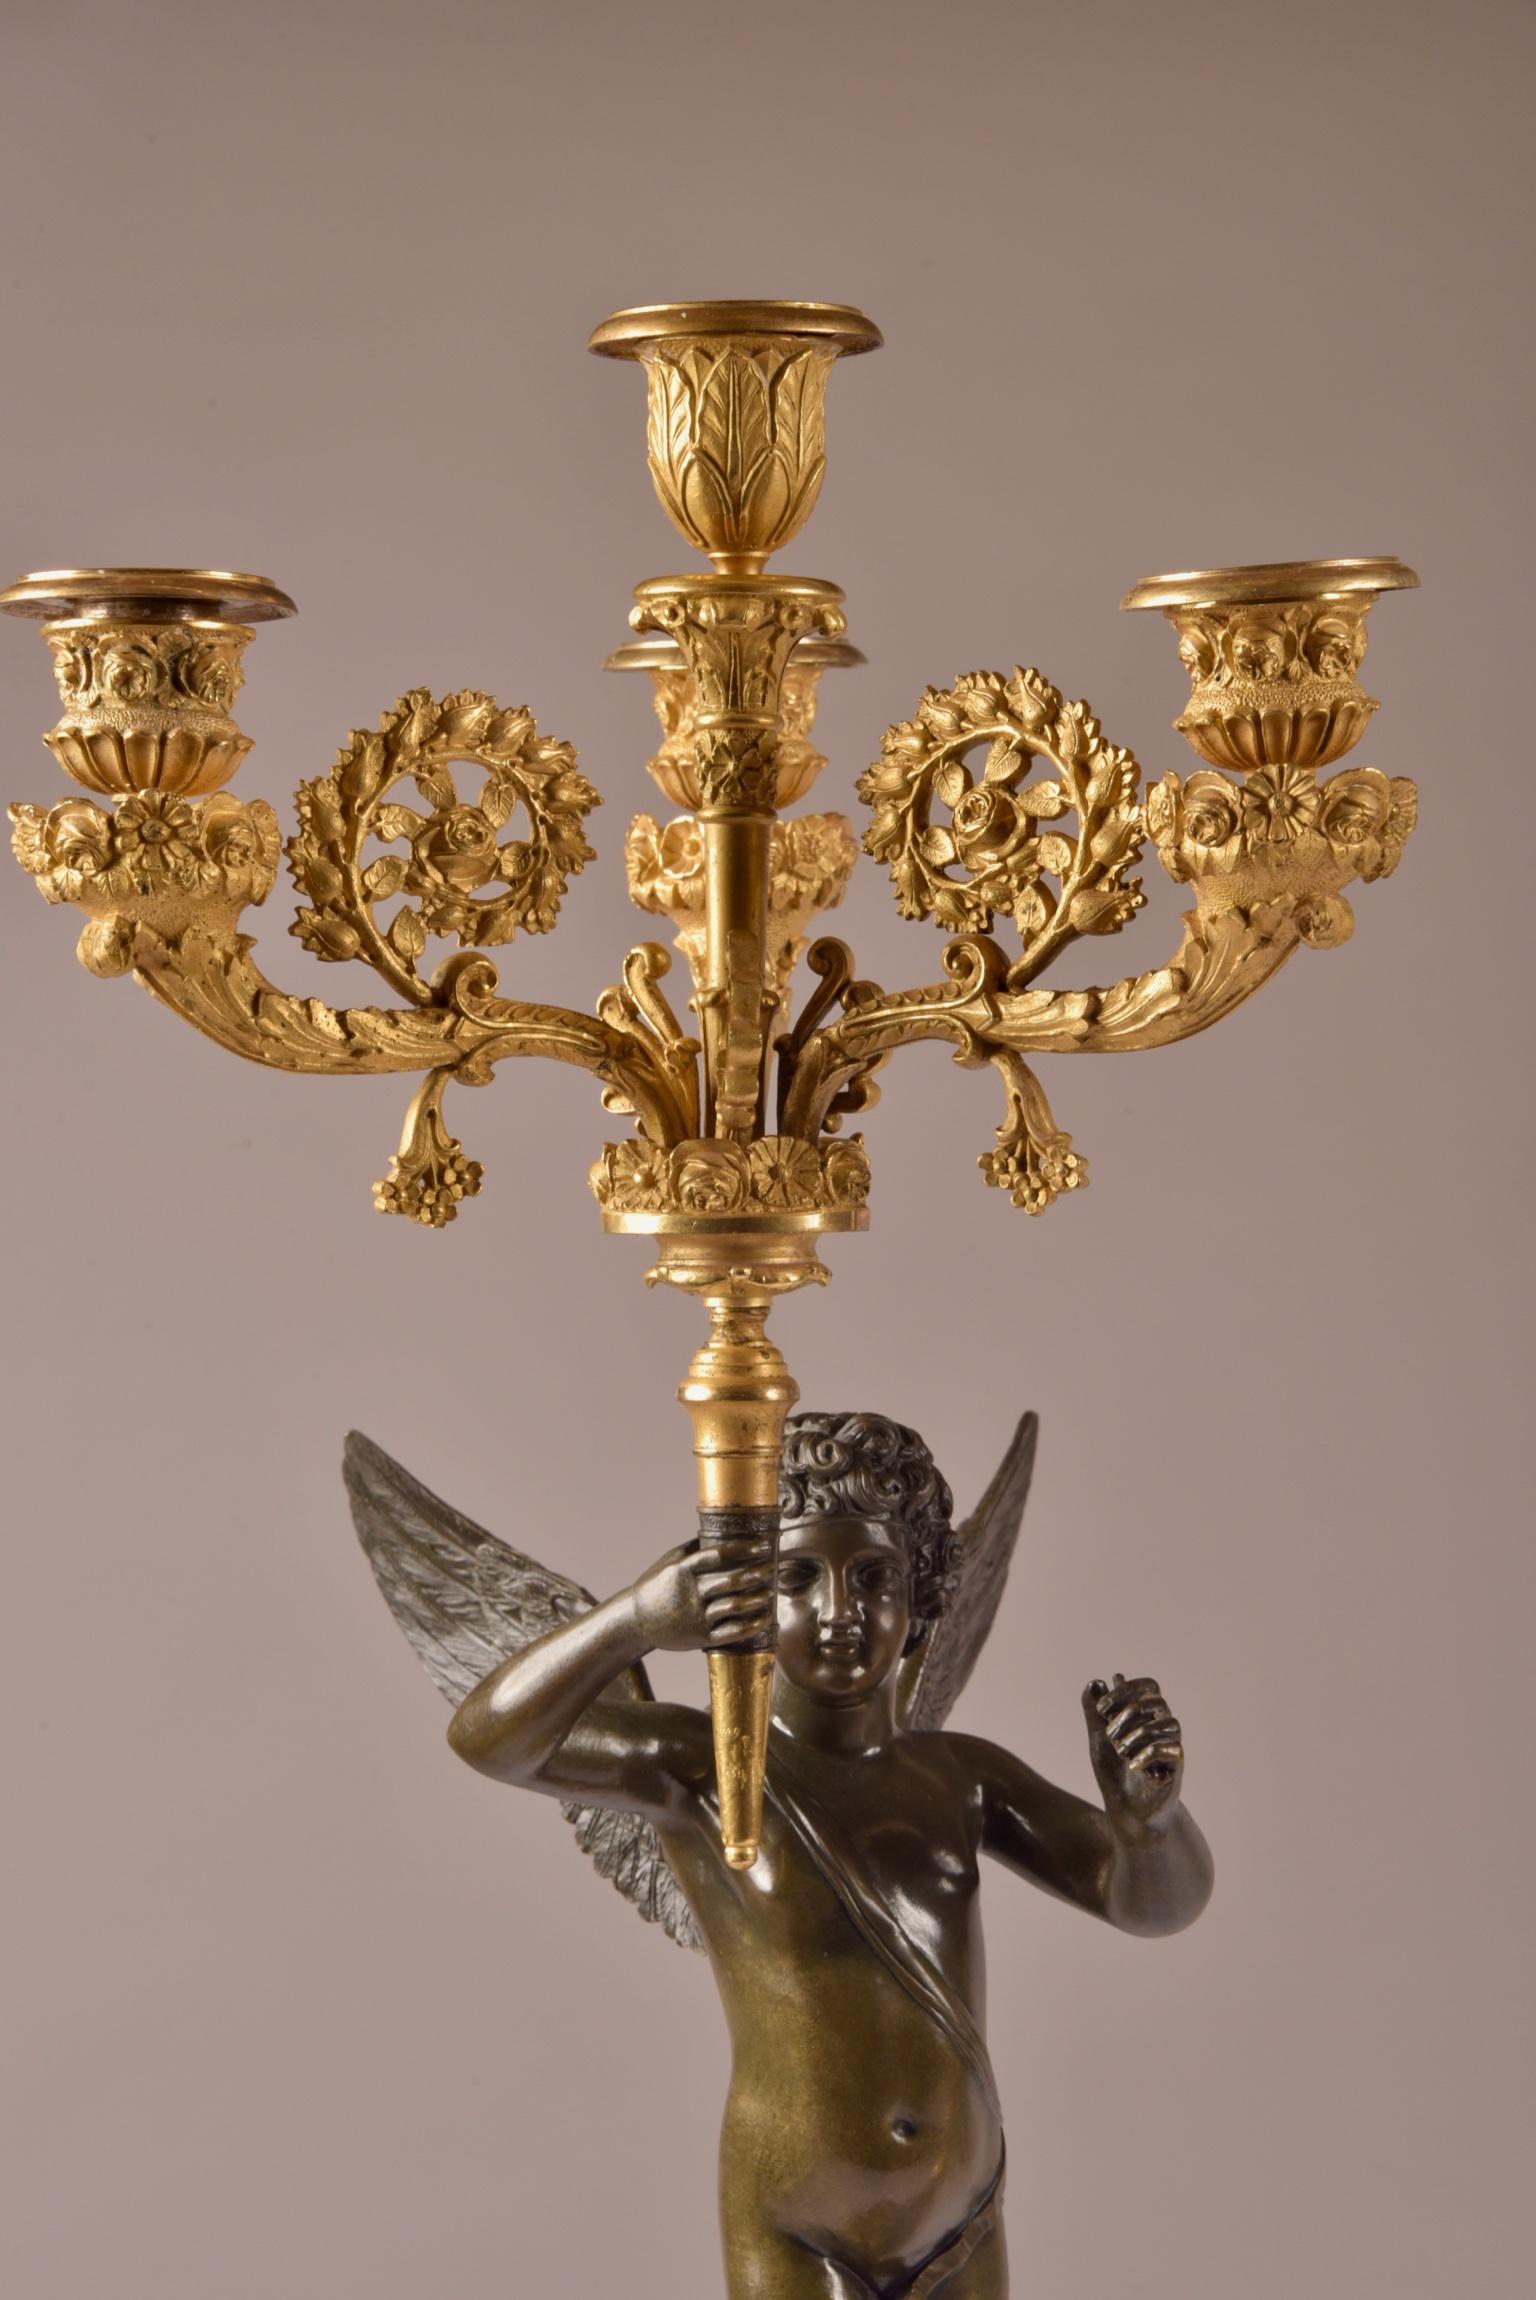 Pair of French Empire Candelabras with Putti, Superb Ormolu Candleholders, 1810  (Patiniert) im Angebot